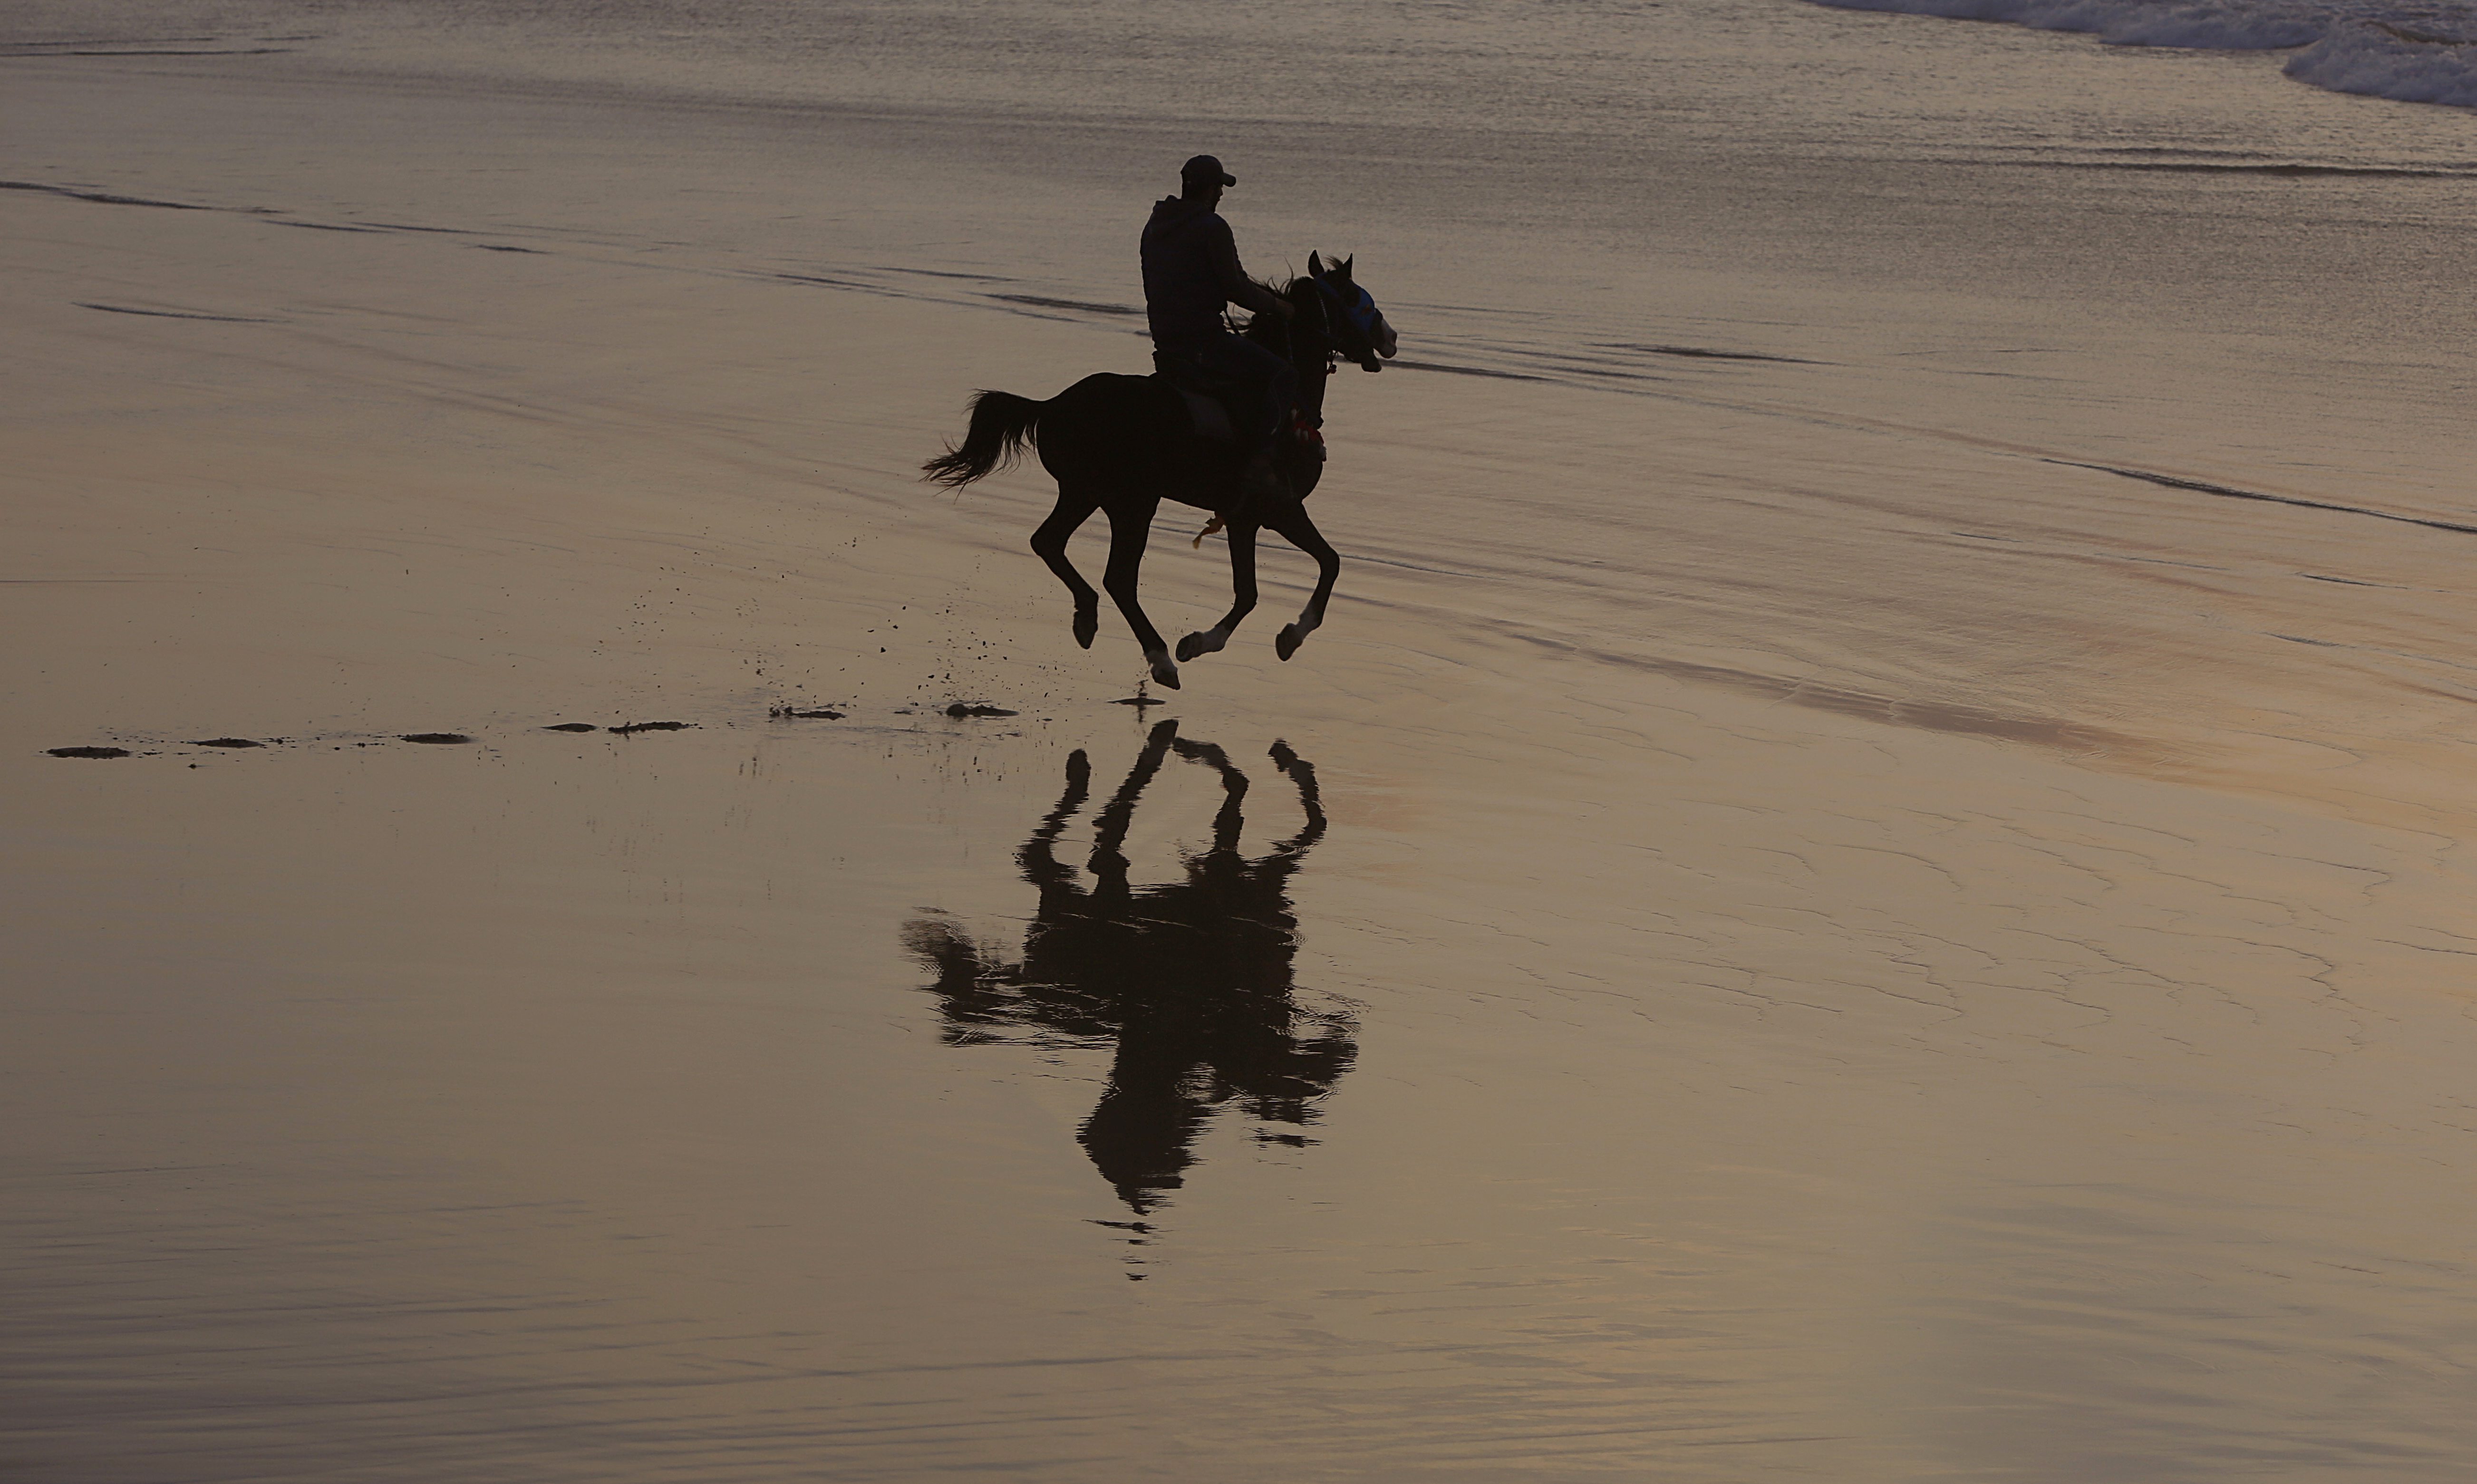 A Palestinian man rides a horse during sunset at the beach, in Gaza City, Saturday, Feb. 22, 2020. The beach is one of the few open public spaces in this densely populated city. (AP Photo/Hatem Moussa)